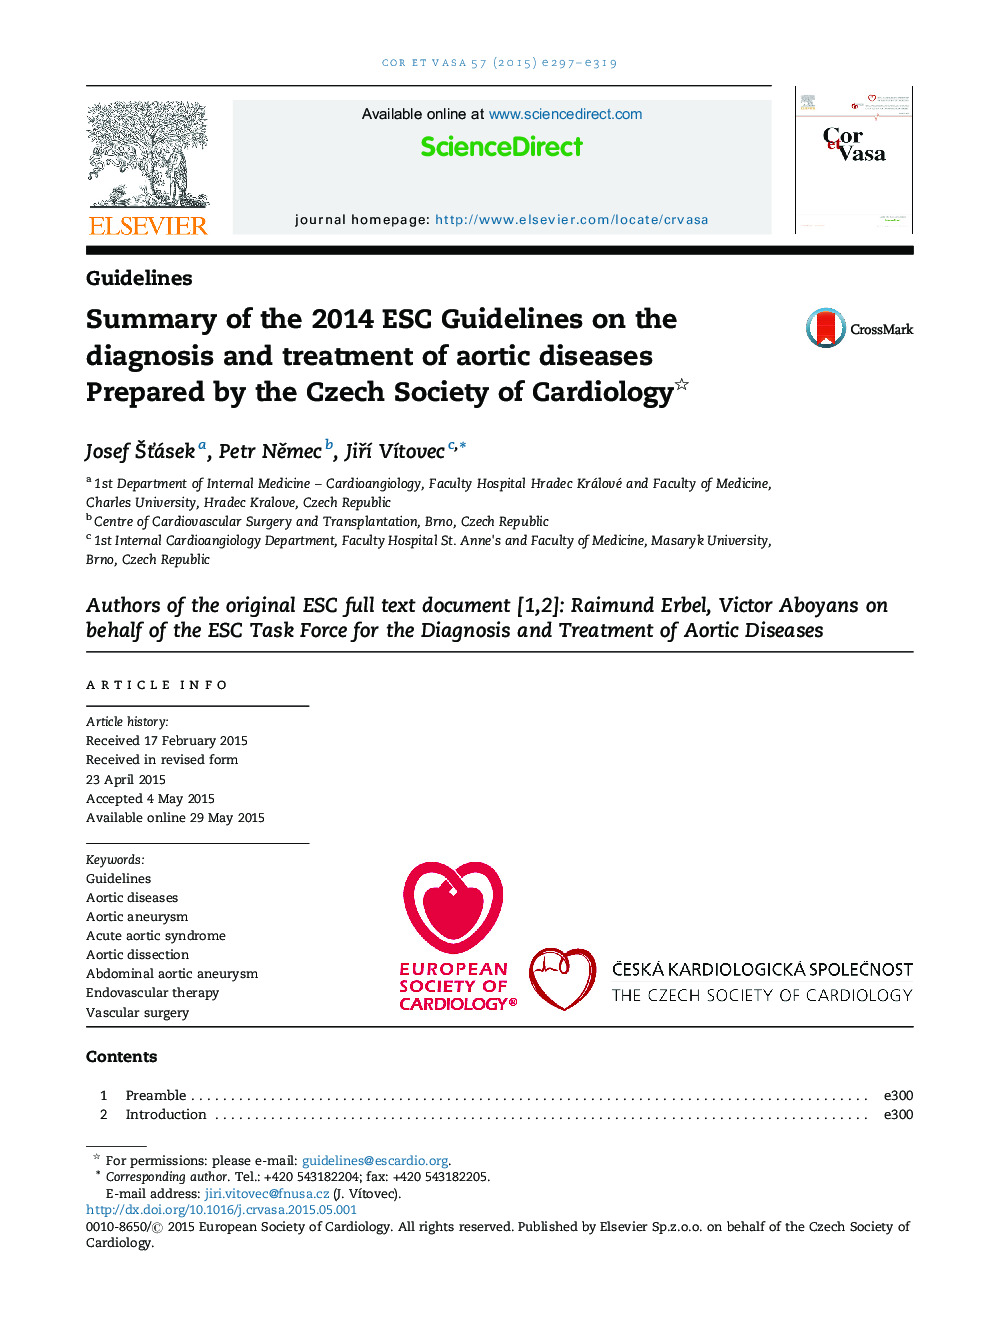 Summary of the 2014 ESC Guidelines on the diagnosis and treatment of aortic diseases